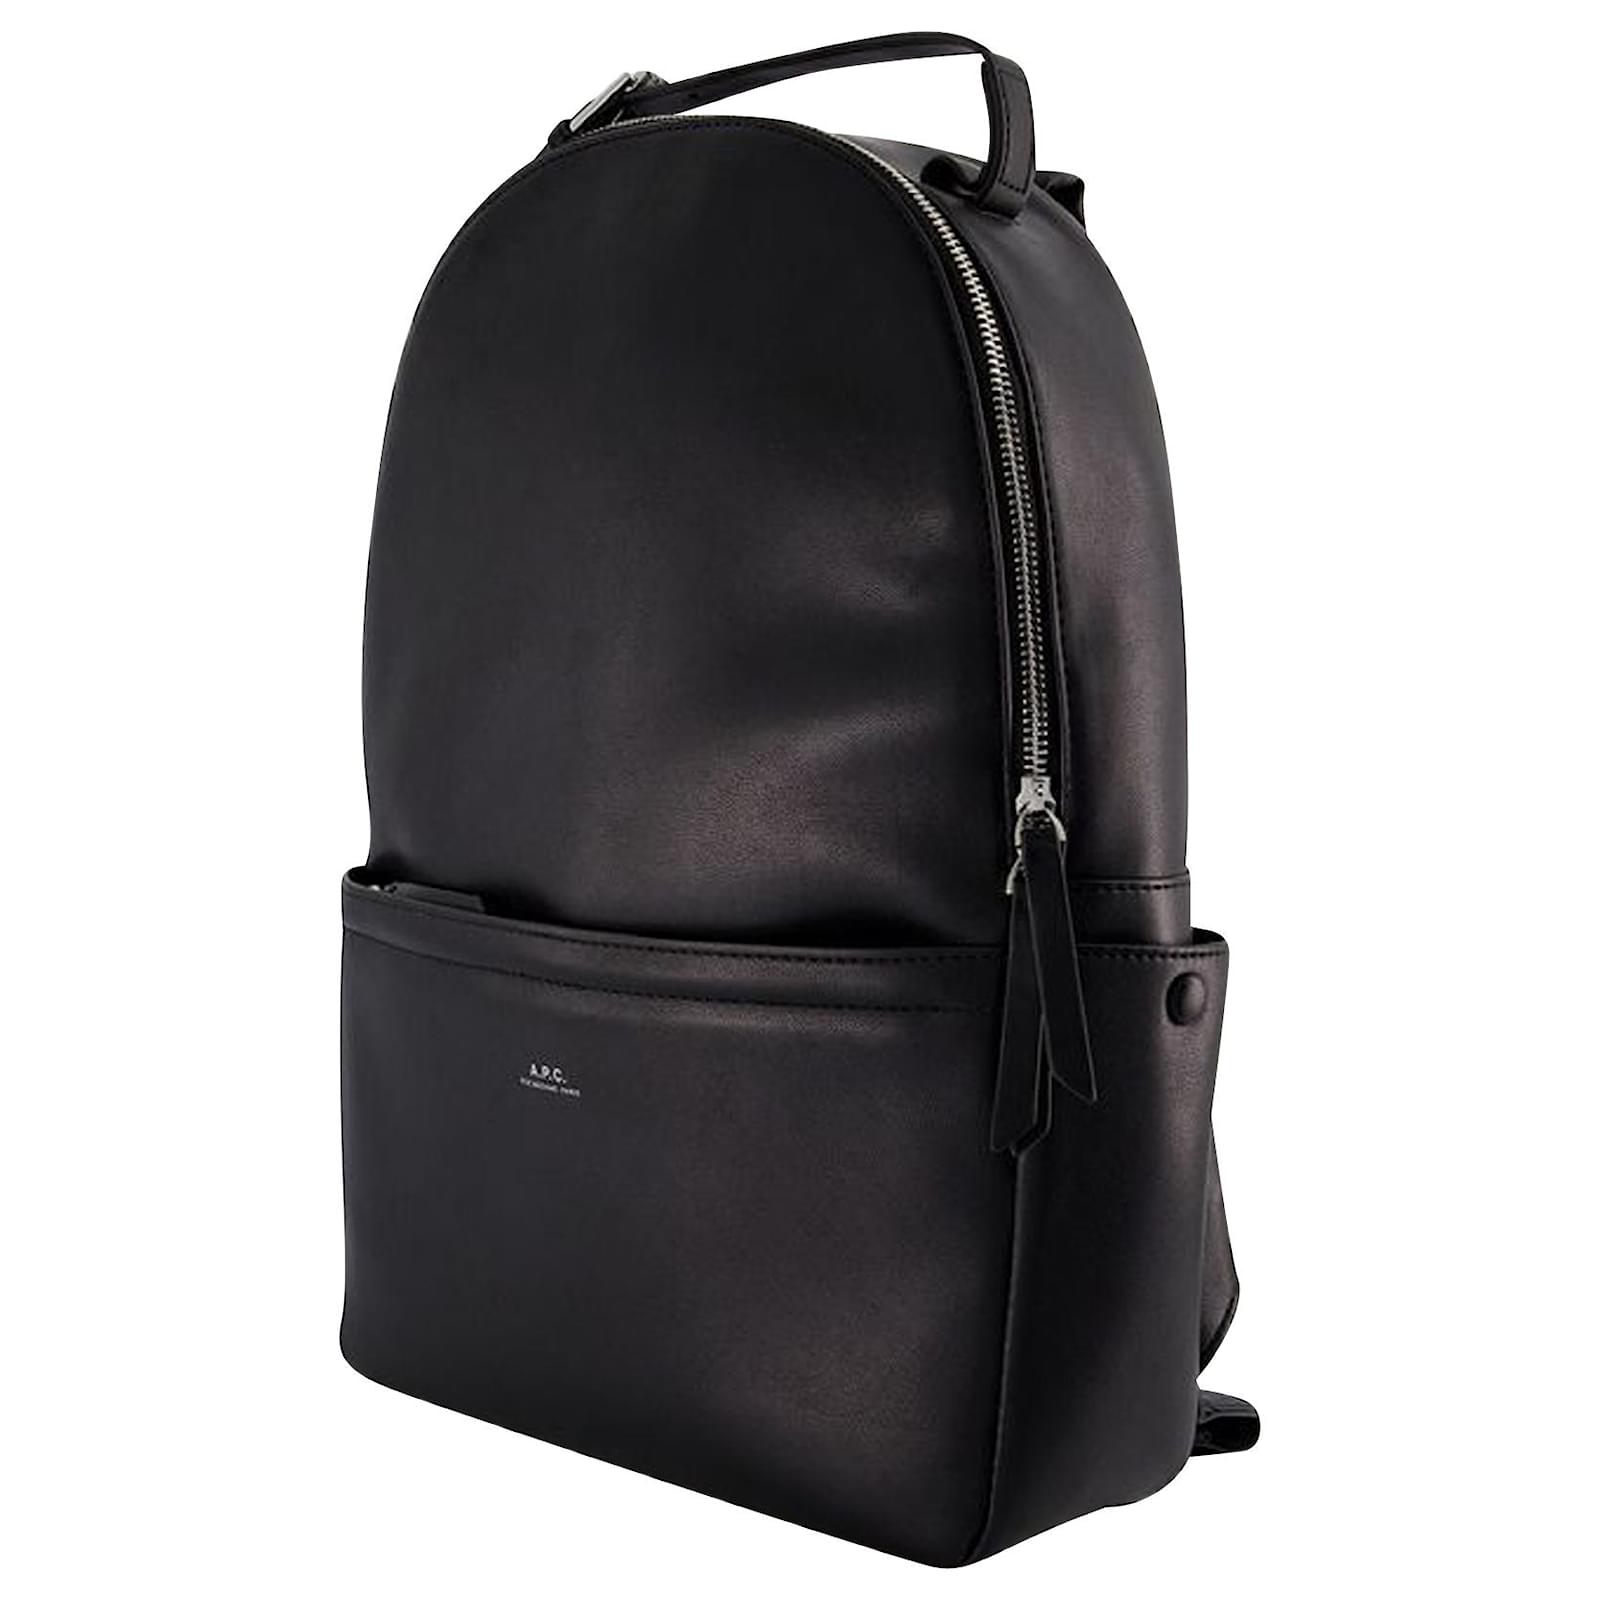 A.P.C. Bags in Black for Men